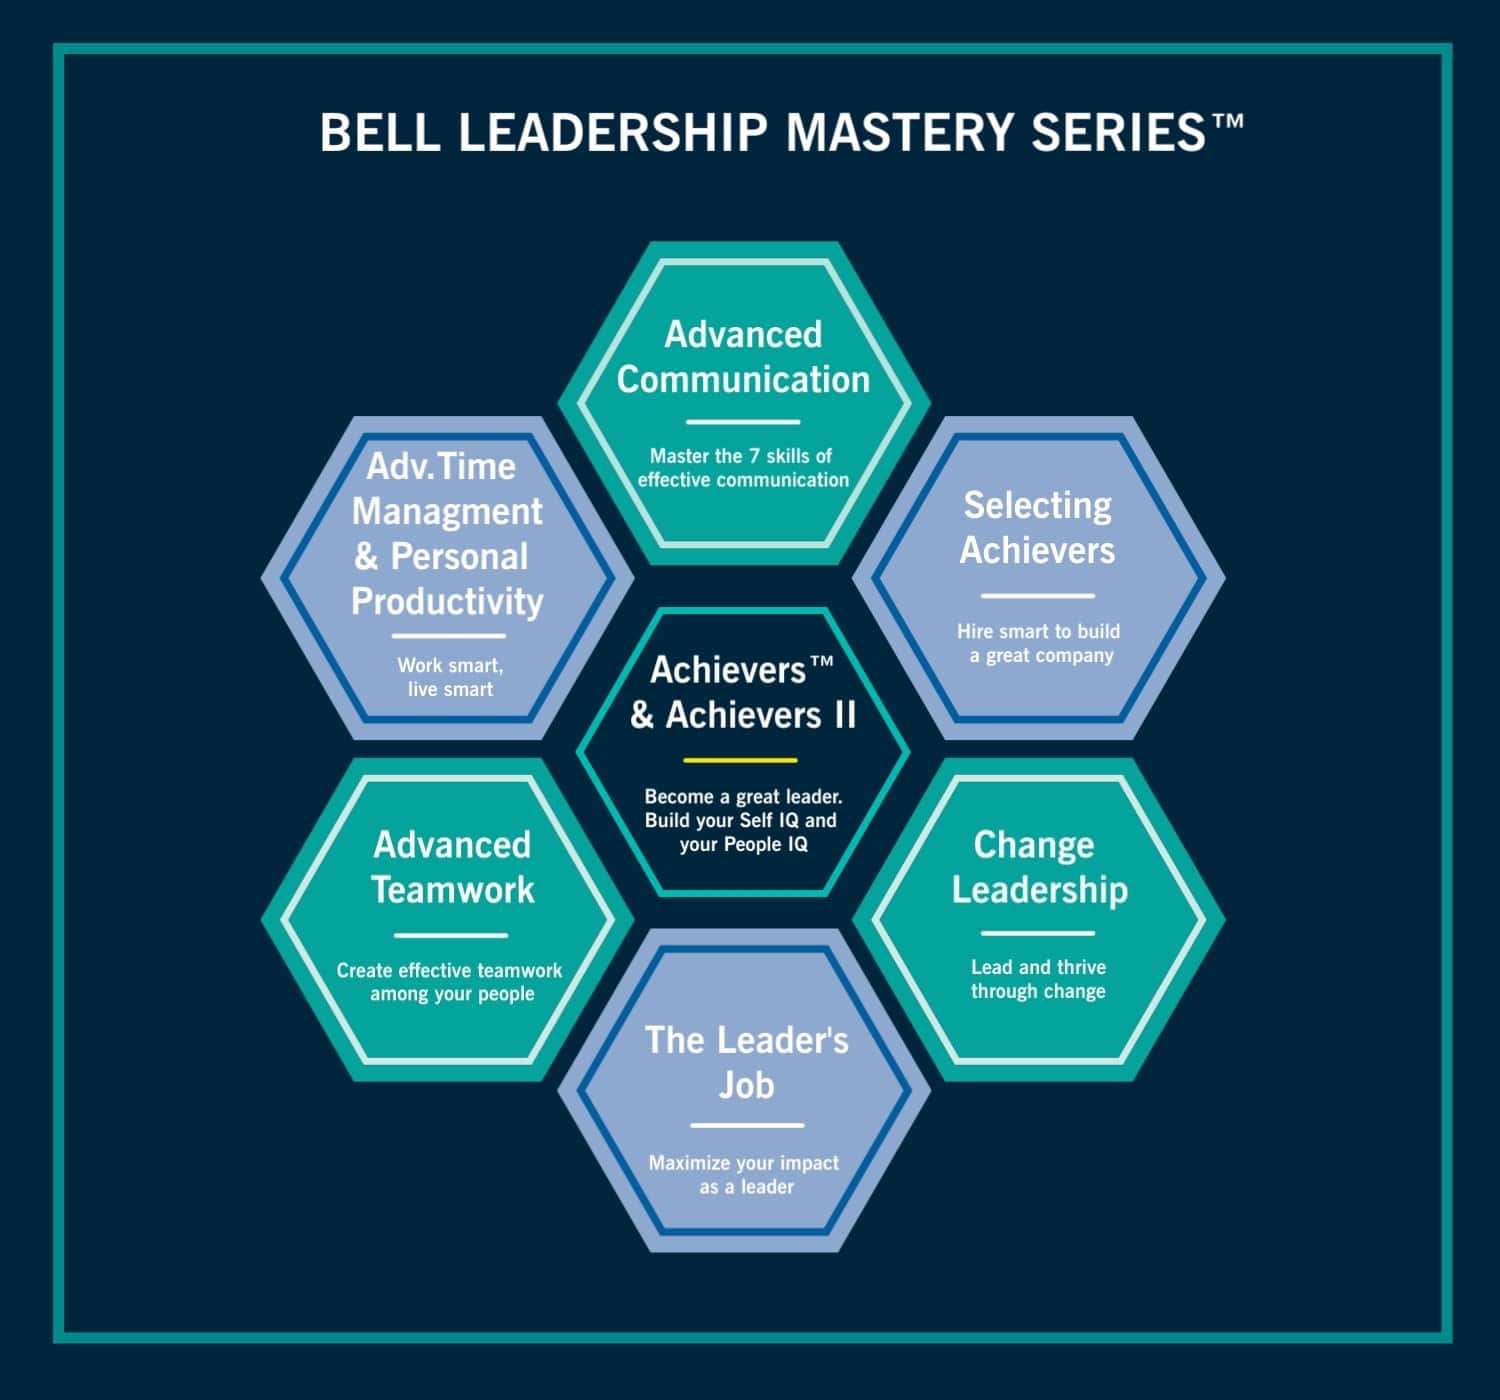 Leadership Mastery Series Infographic 2 RESIZE